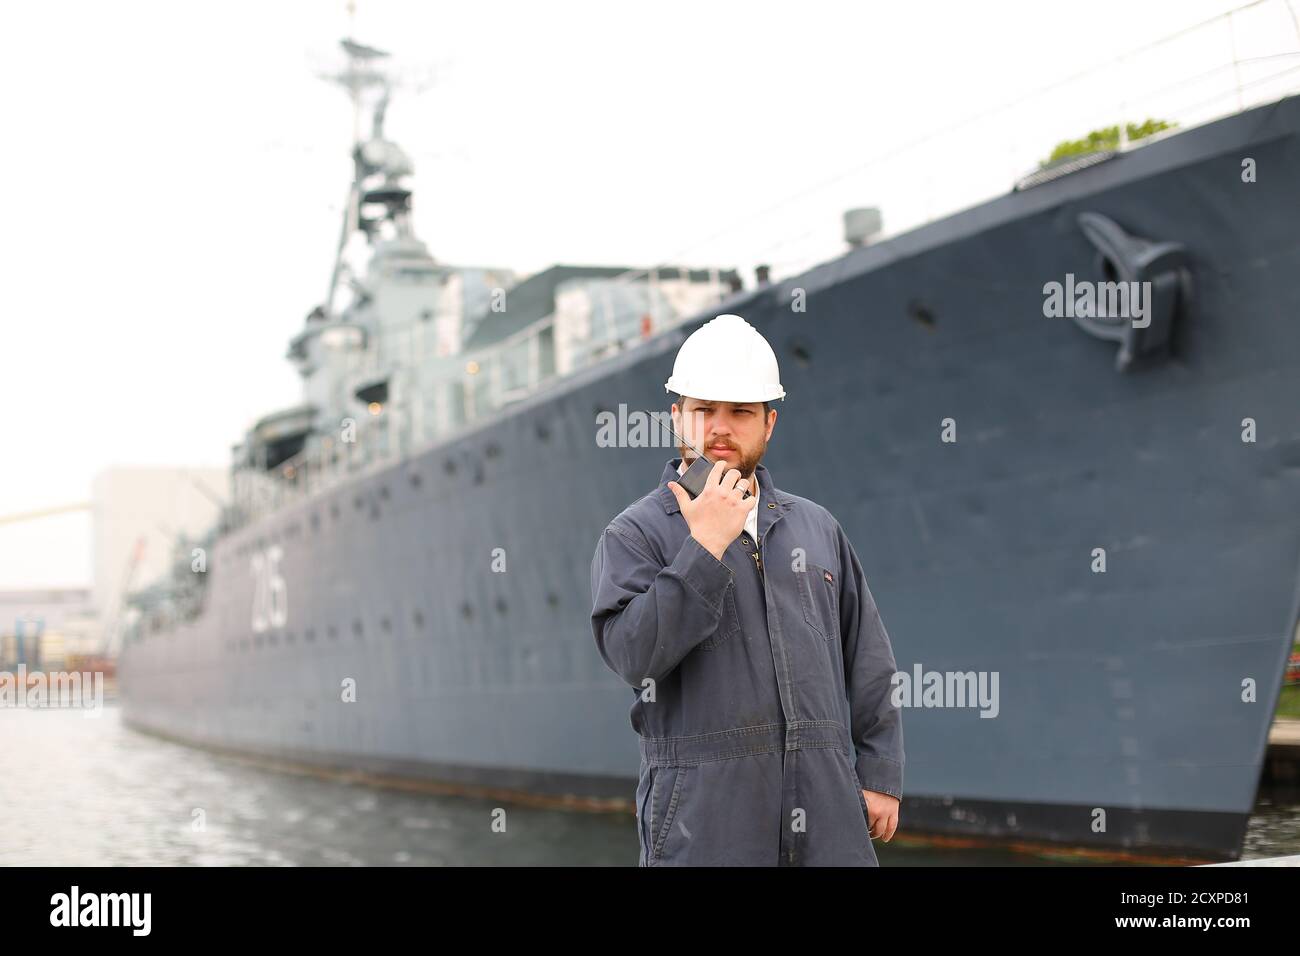 Deck Officer wearing helmet and talking by VHF walkie talkie radio in hands, standing on coast with offshore vessel in background. Concept of maritime Stock Photo